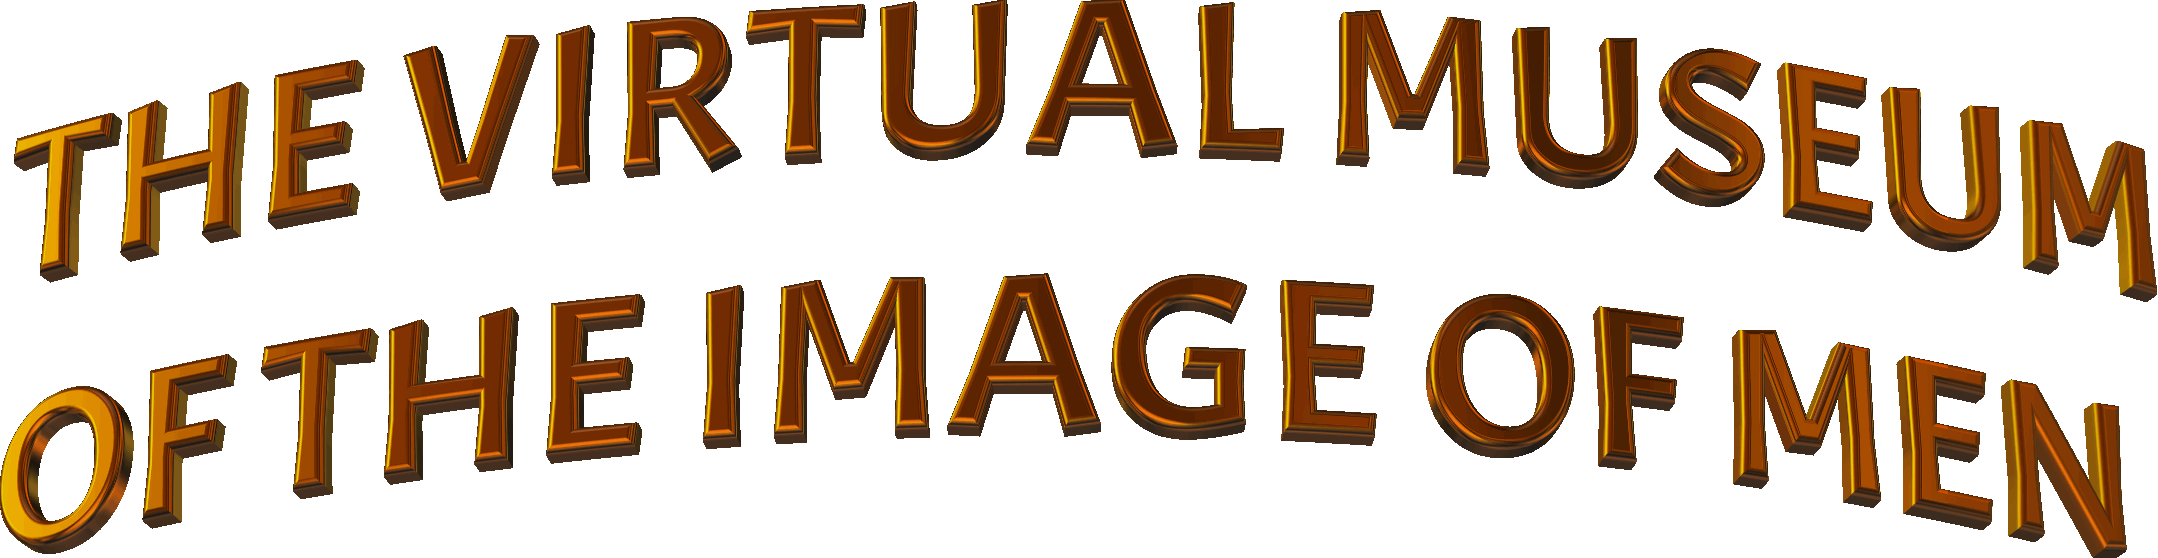 THE VIRTUAL MUSEUM OF THE IMAGE OF MEN